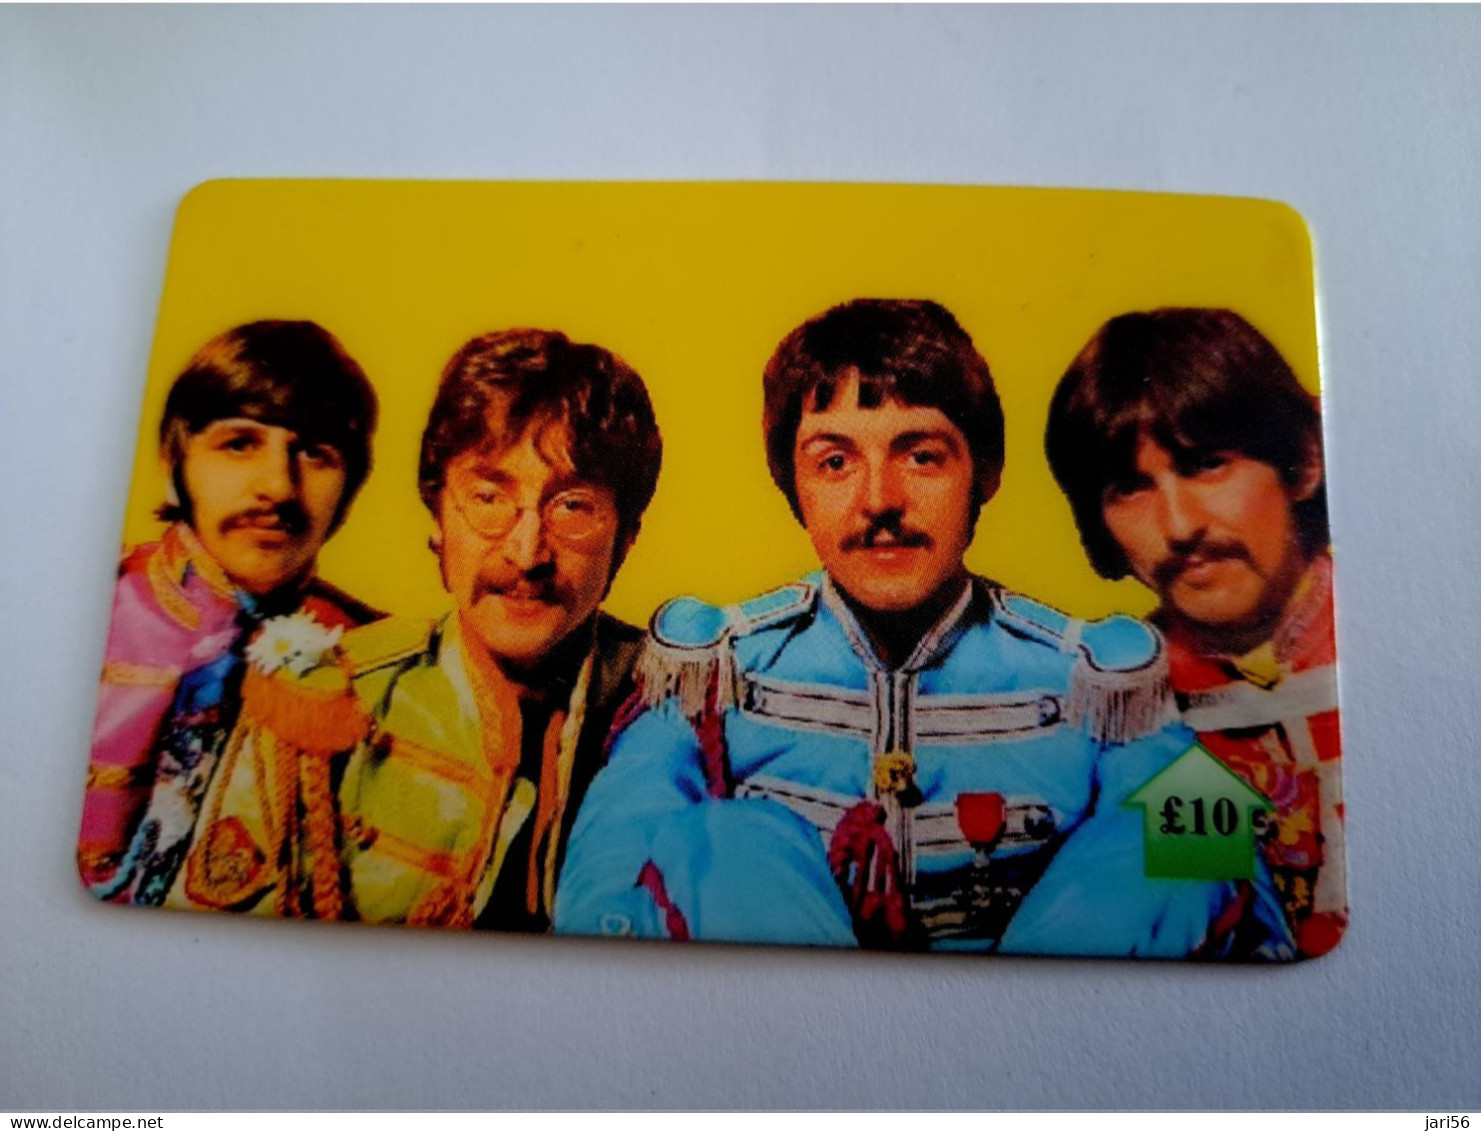 GREAT BRITAIN / 10 POUND /MAGSTRIPE  / BEATLES  PHONECARD/ LIMITED EDITION/  ONLY 500 EX     **15690** - [10] Colecciones